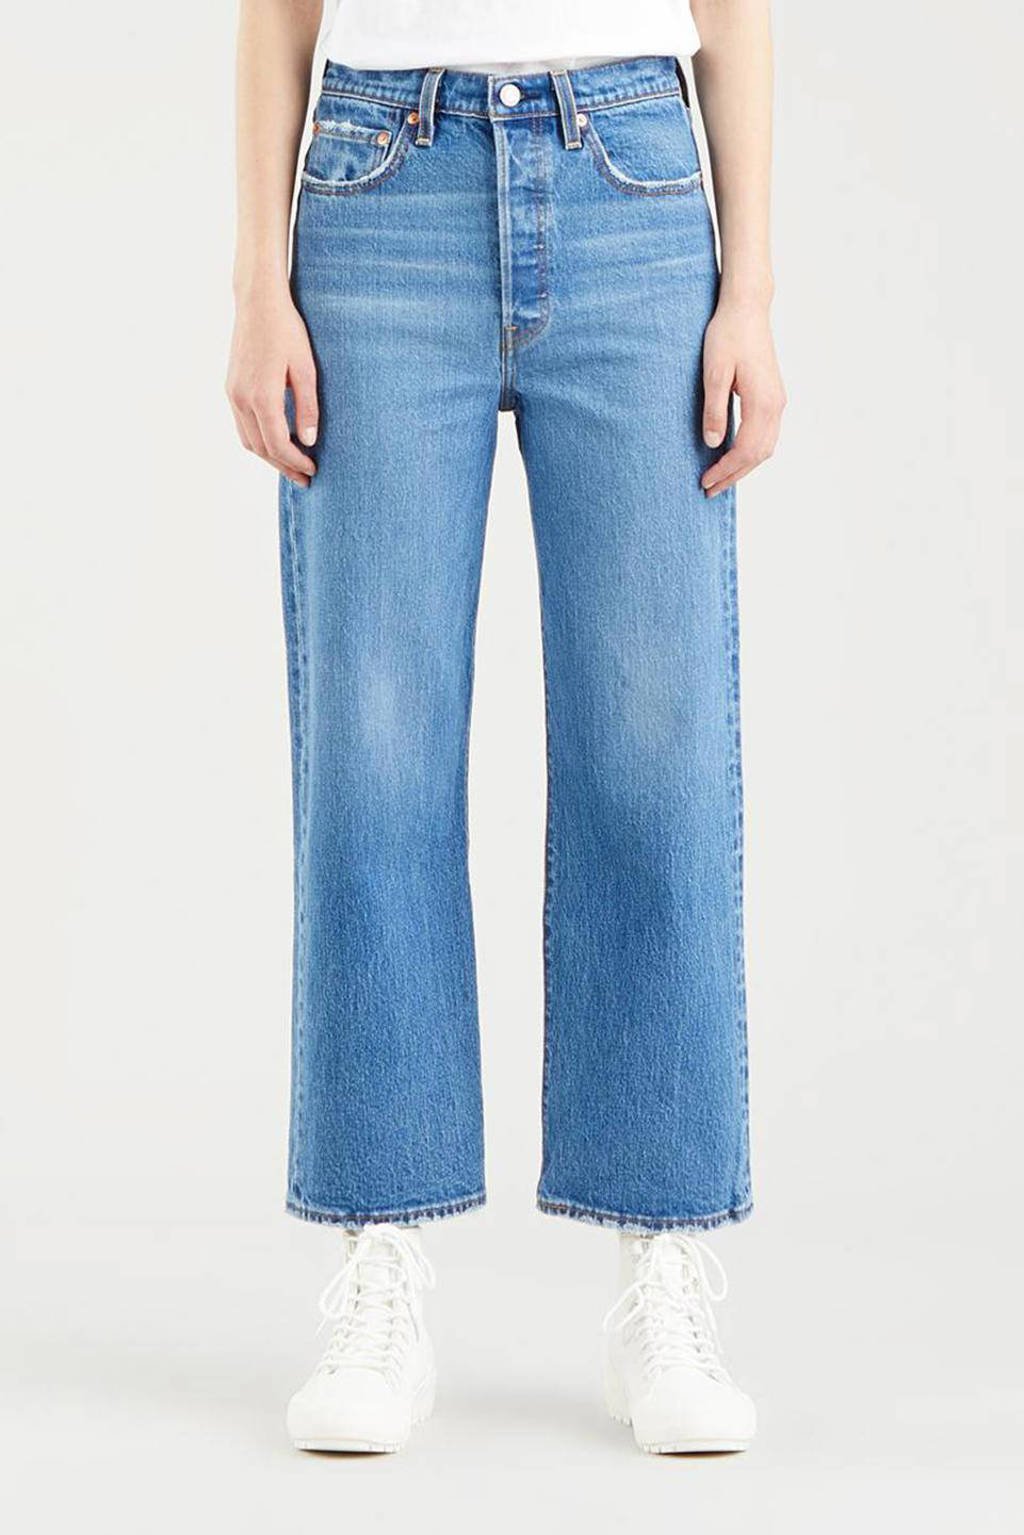 Levi's Ribcage straight cropped high waist jeans jazz jive together